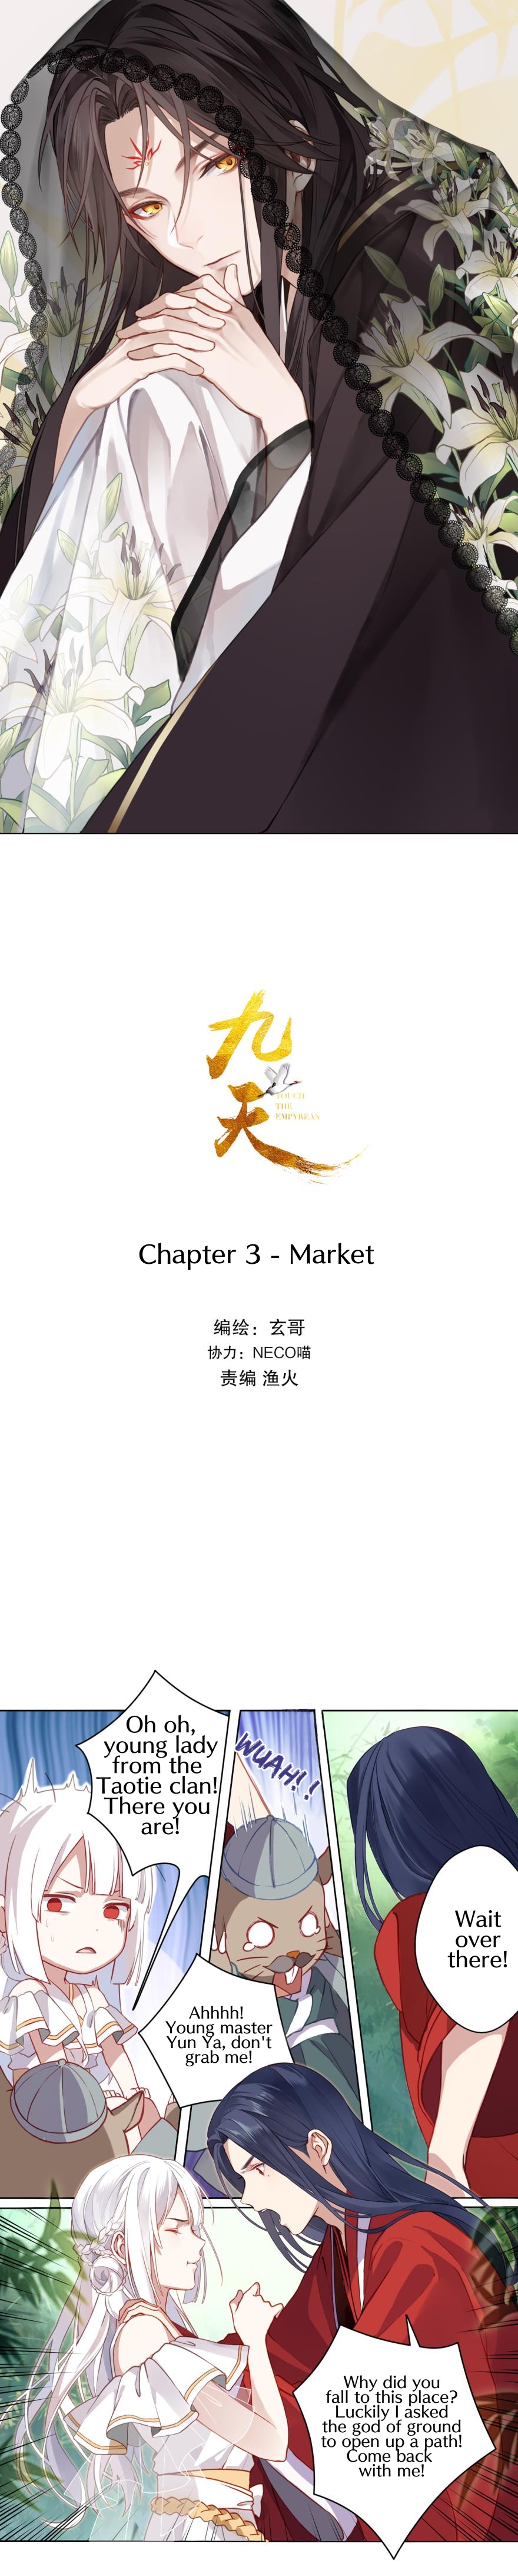 Touch the Empyrean Ch. 3 Market